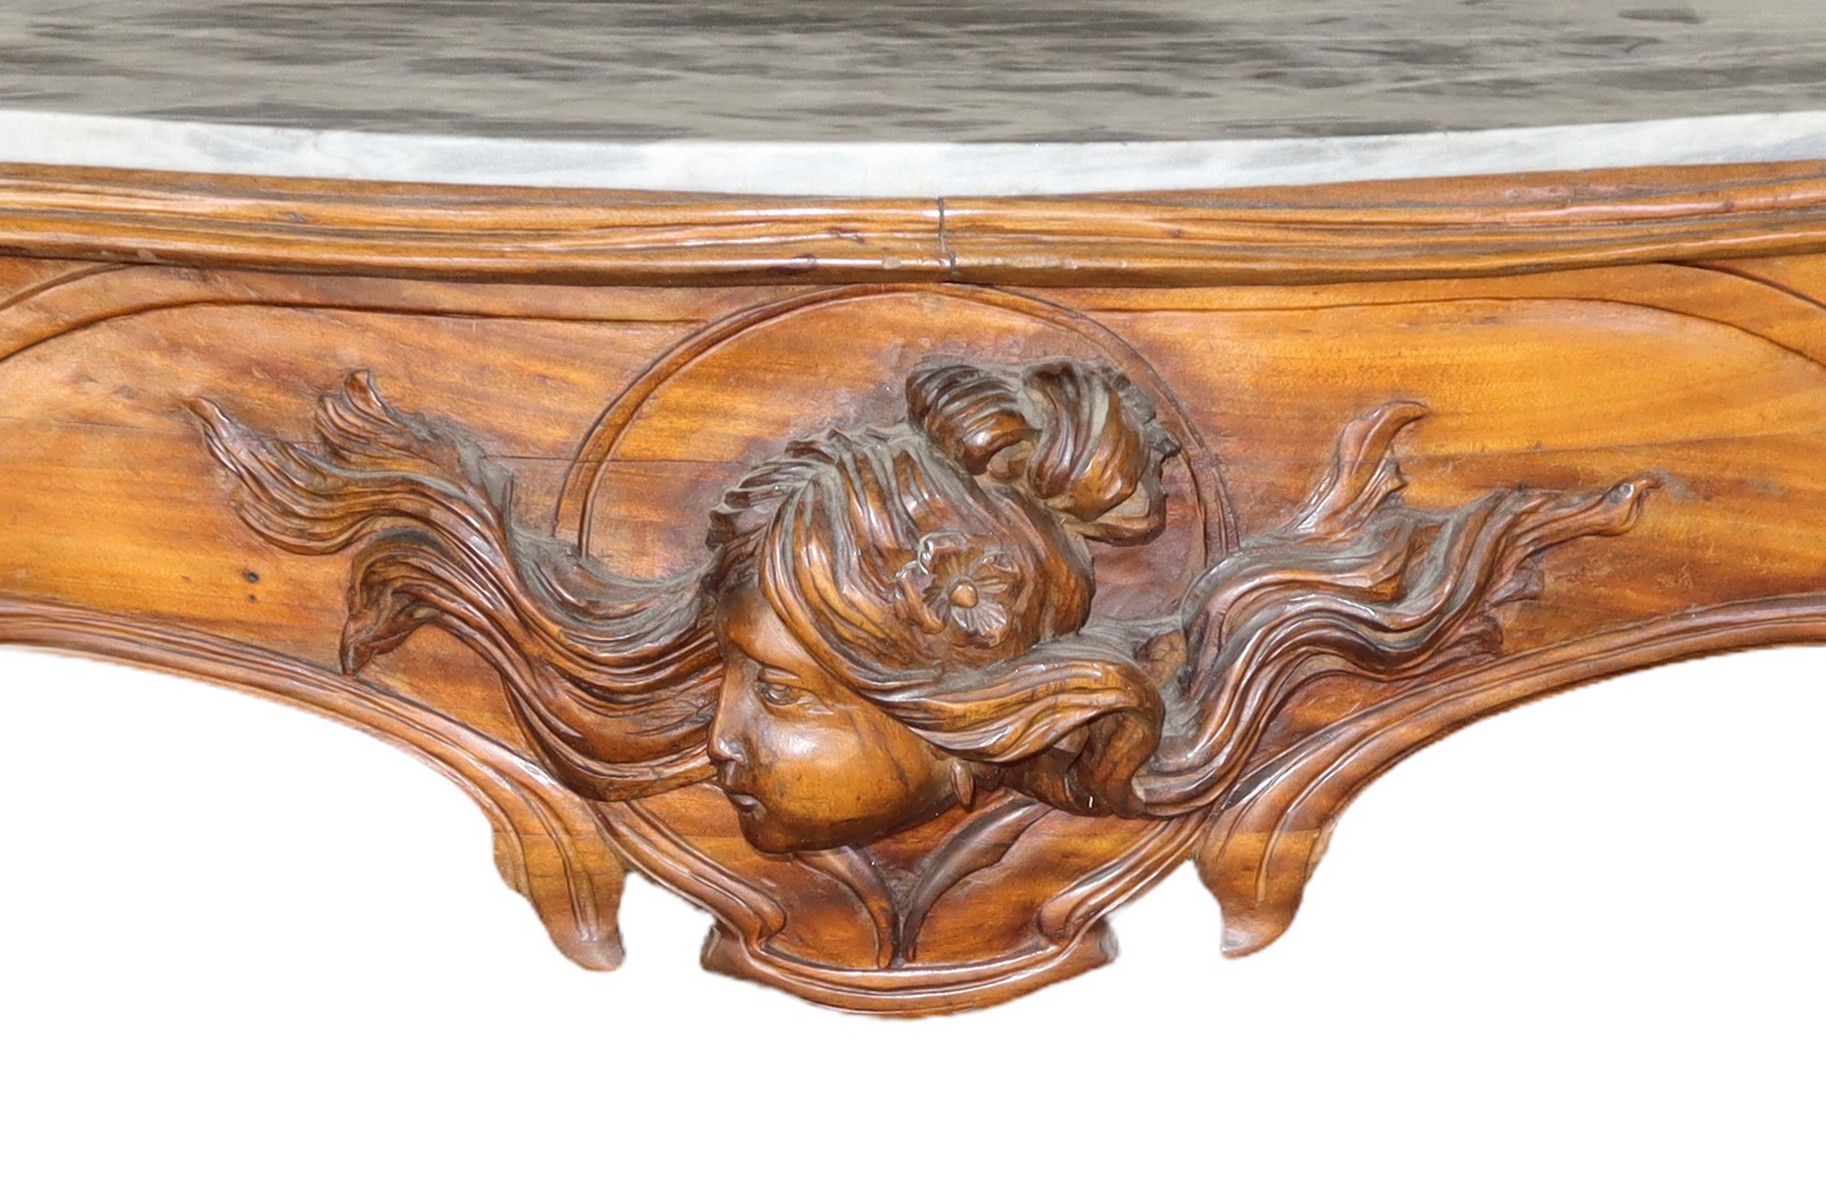 Liberty console in walnut wood, bardiglio gray marble on the top, Early 20th century - Image 2 of 4